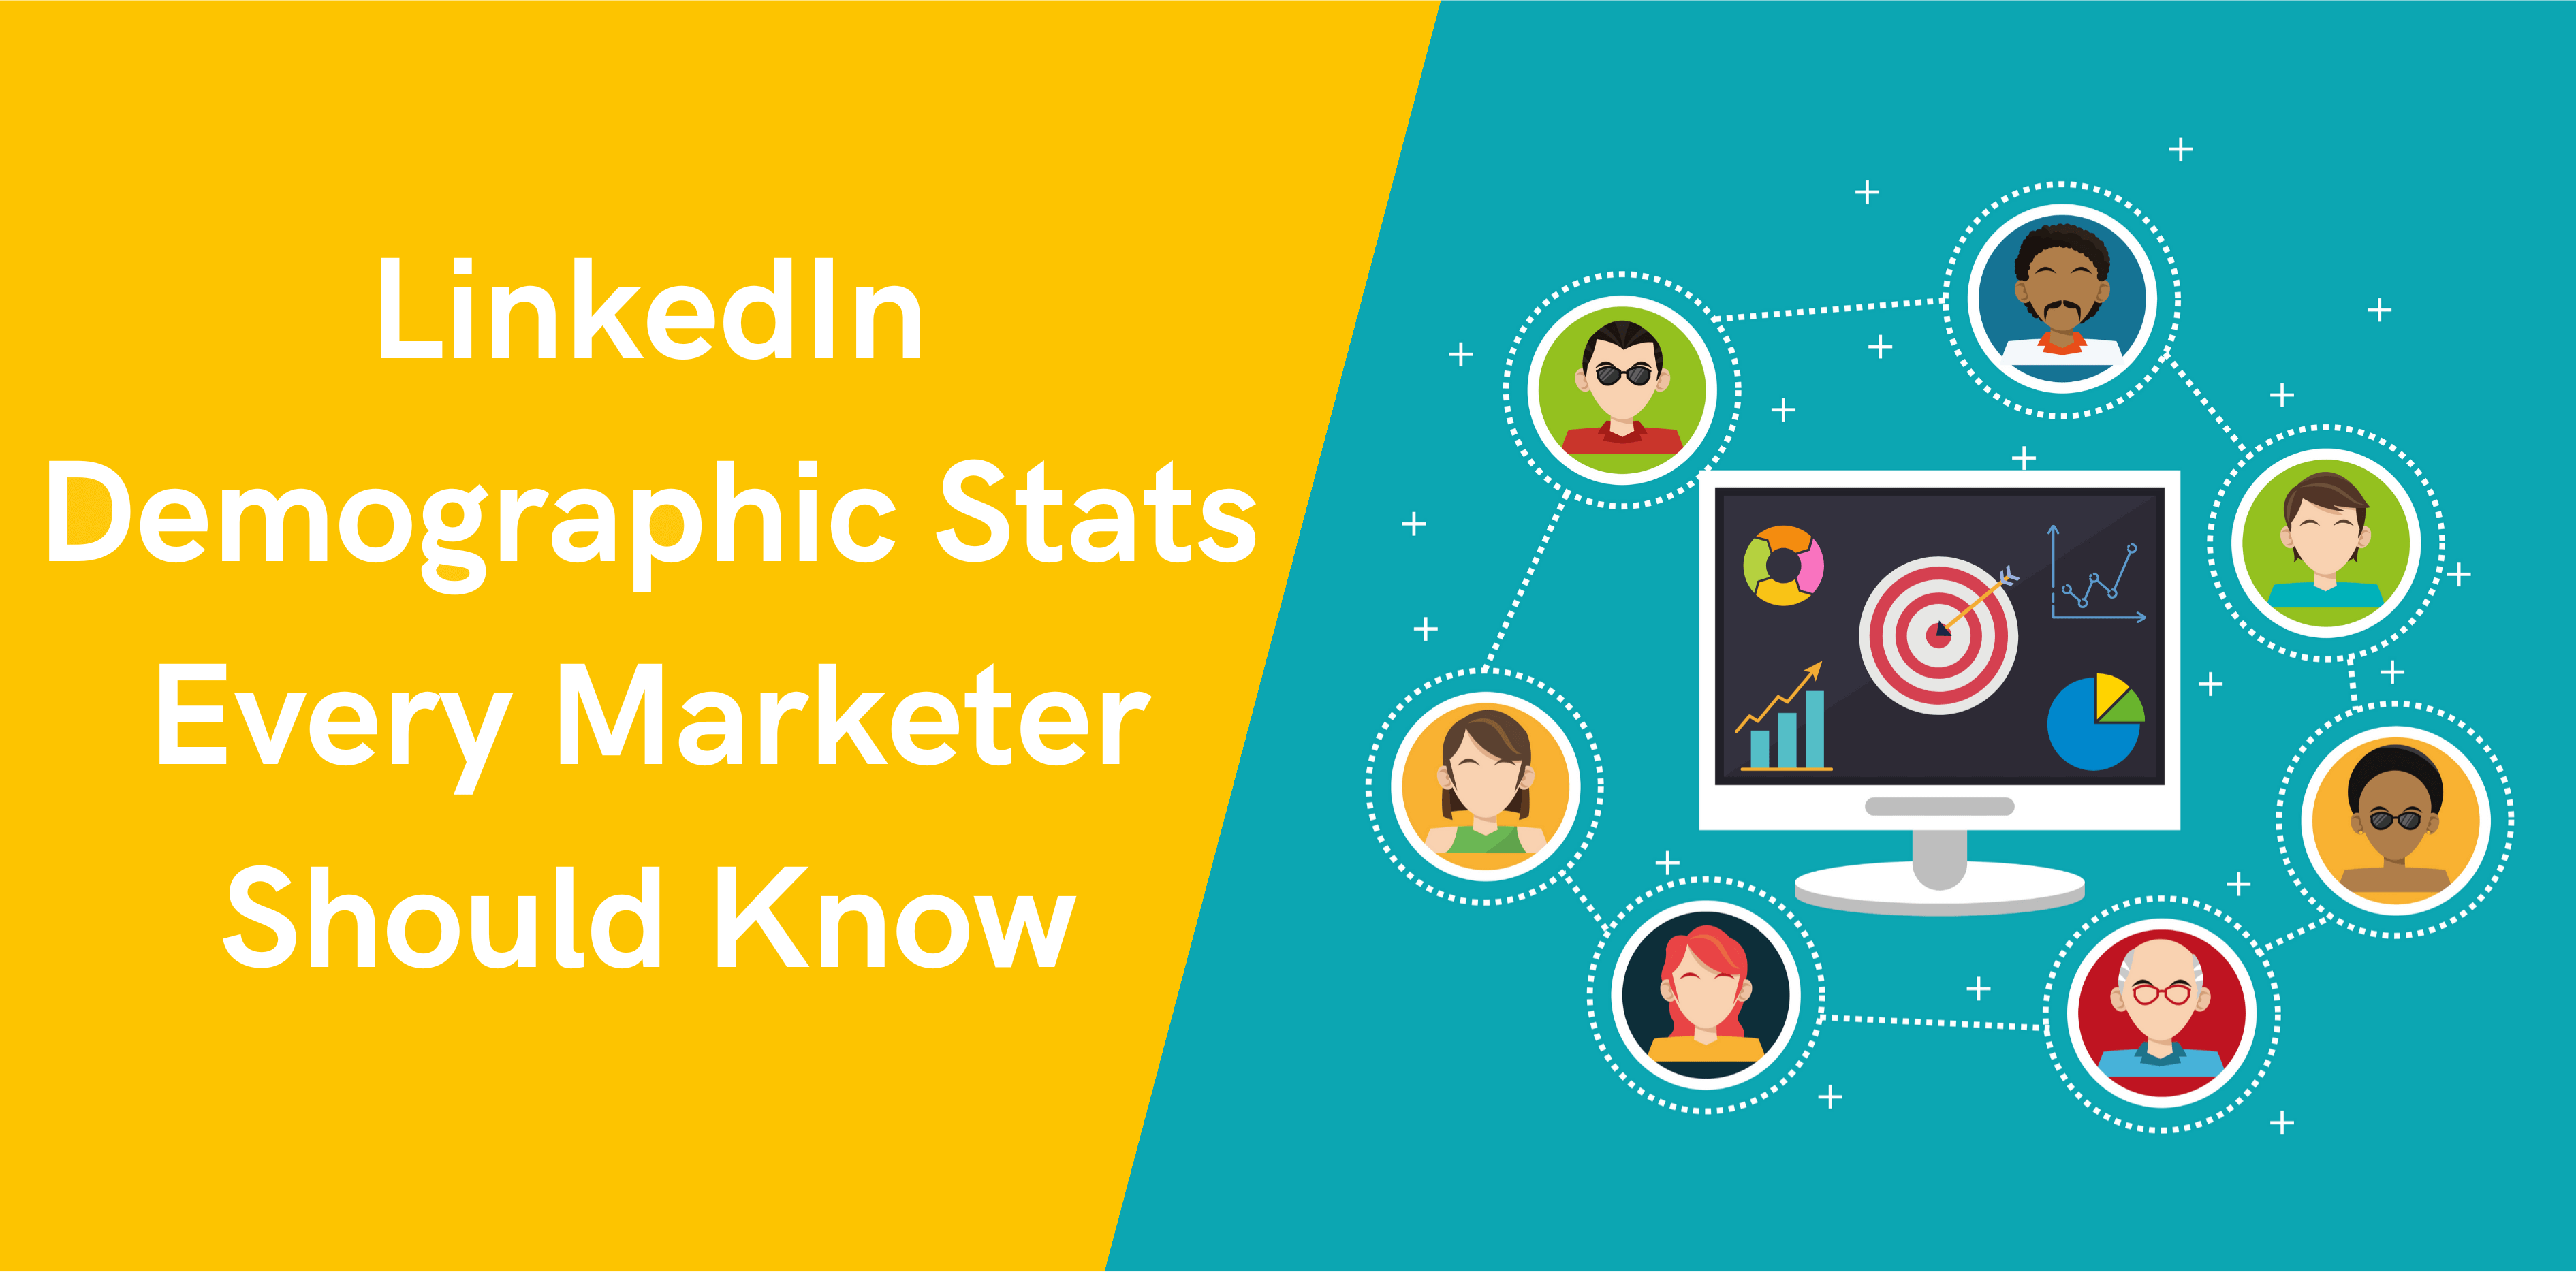 Thumbnail-LinkedIn-Demographic-Stats-Every-Marketer-Should-Know